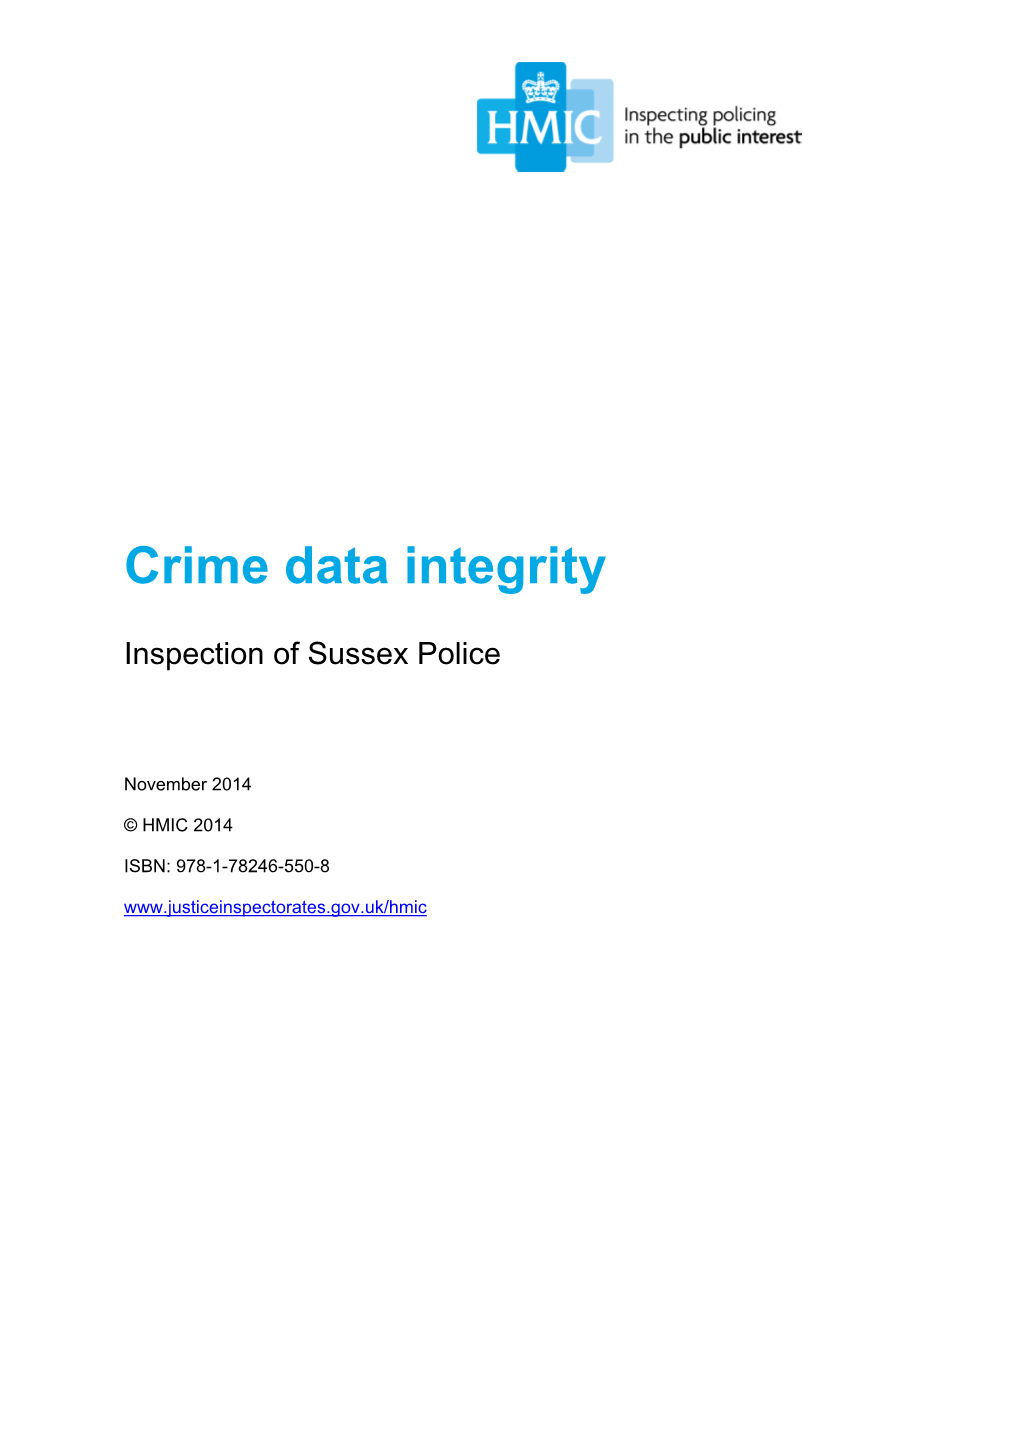 Crime Data Integrity – Inspection of Sussex Police